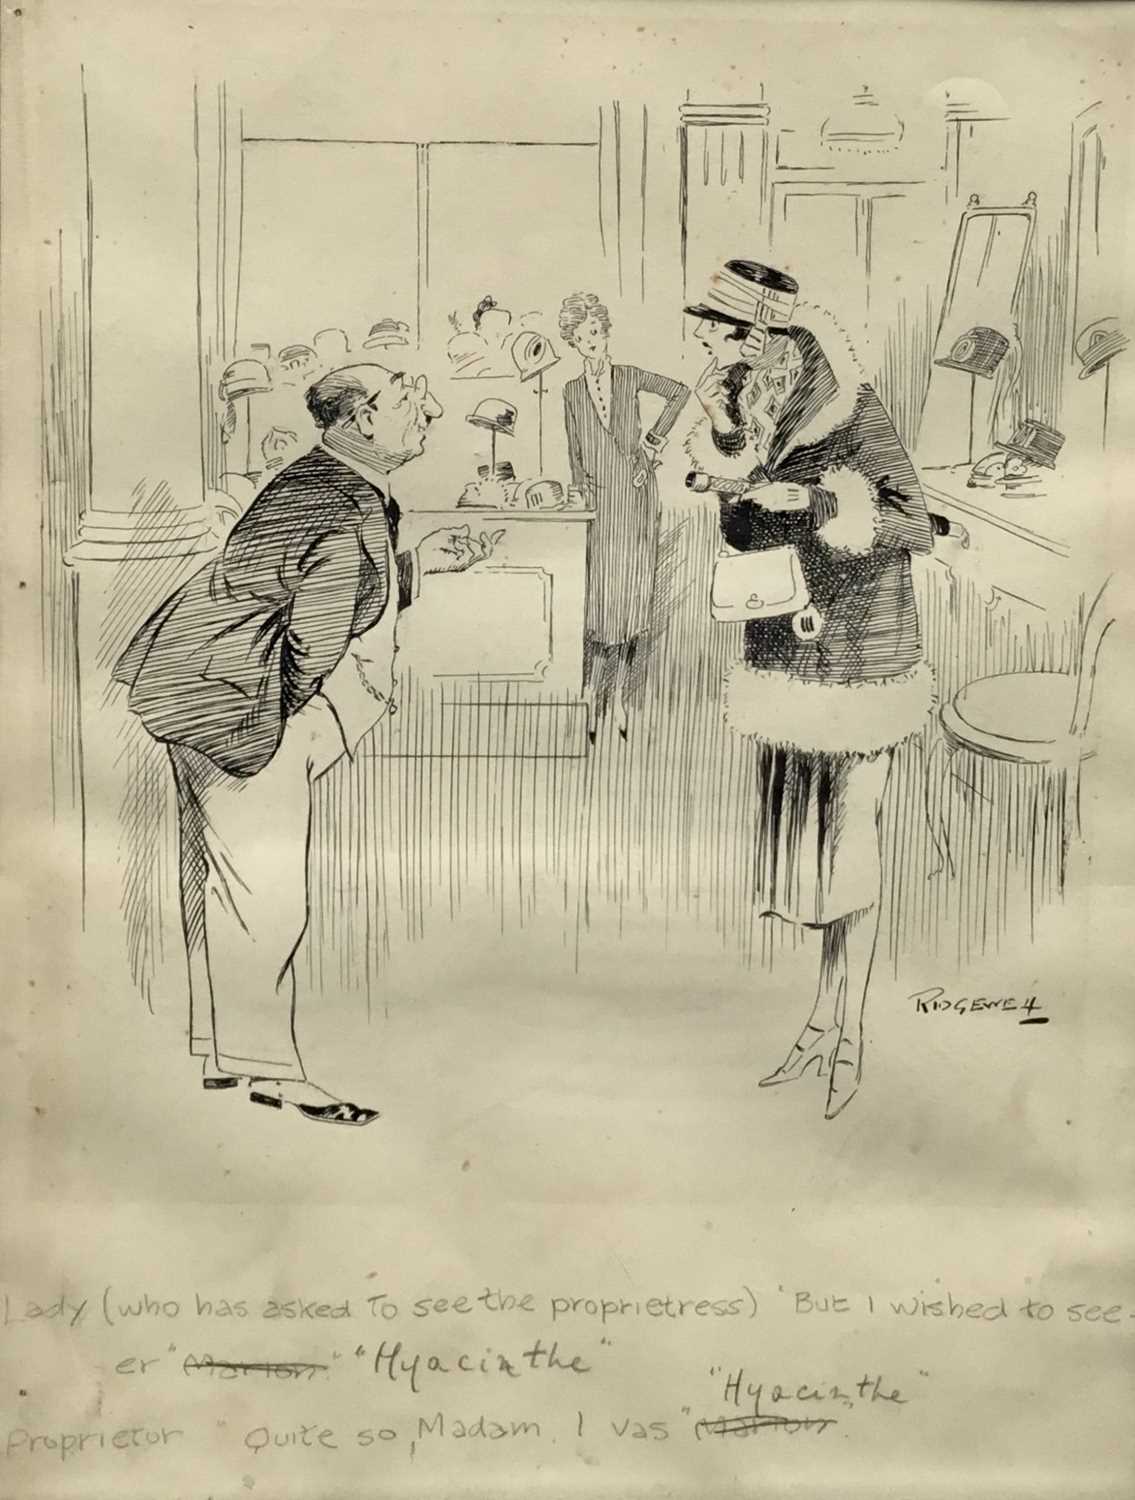 William Leigh Ridgewell (1881-1937) pen and ink cartoon for Punch magazine circa 1920